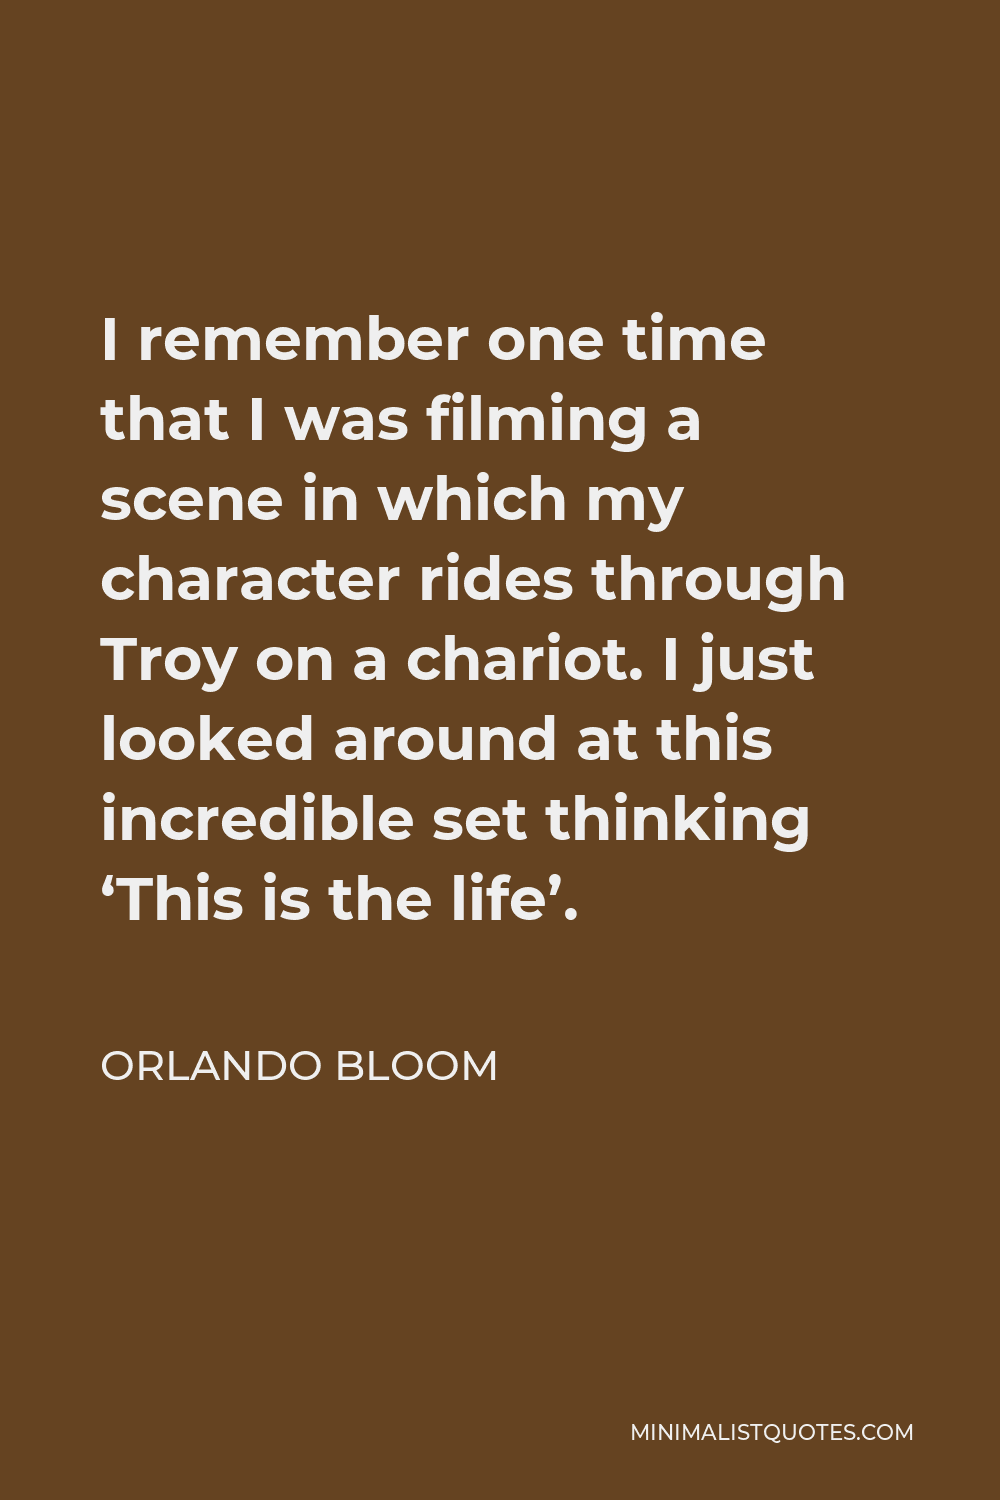 Orlando Bloom Quote - I remember one time that I was filming a scene in which my character rides through Troy on a chariot. I just looked around at this incredible set thinking ‘This is the life’.